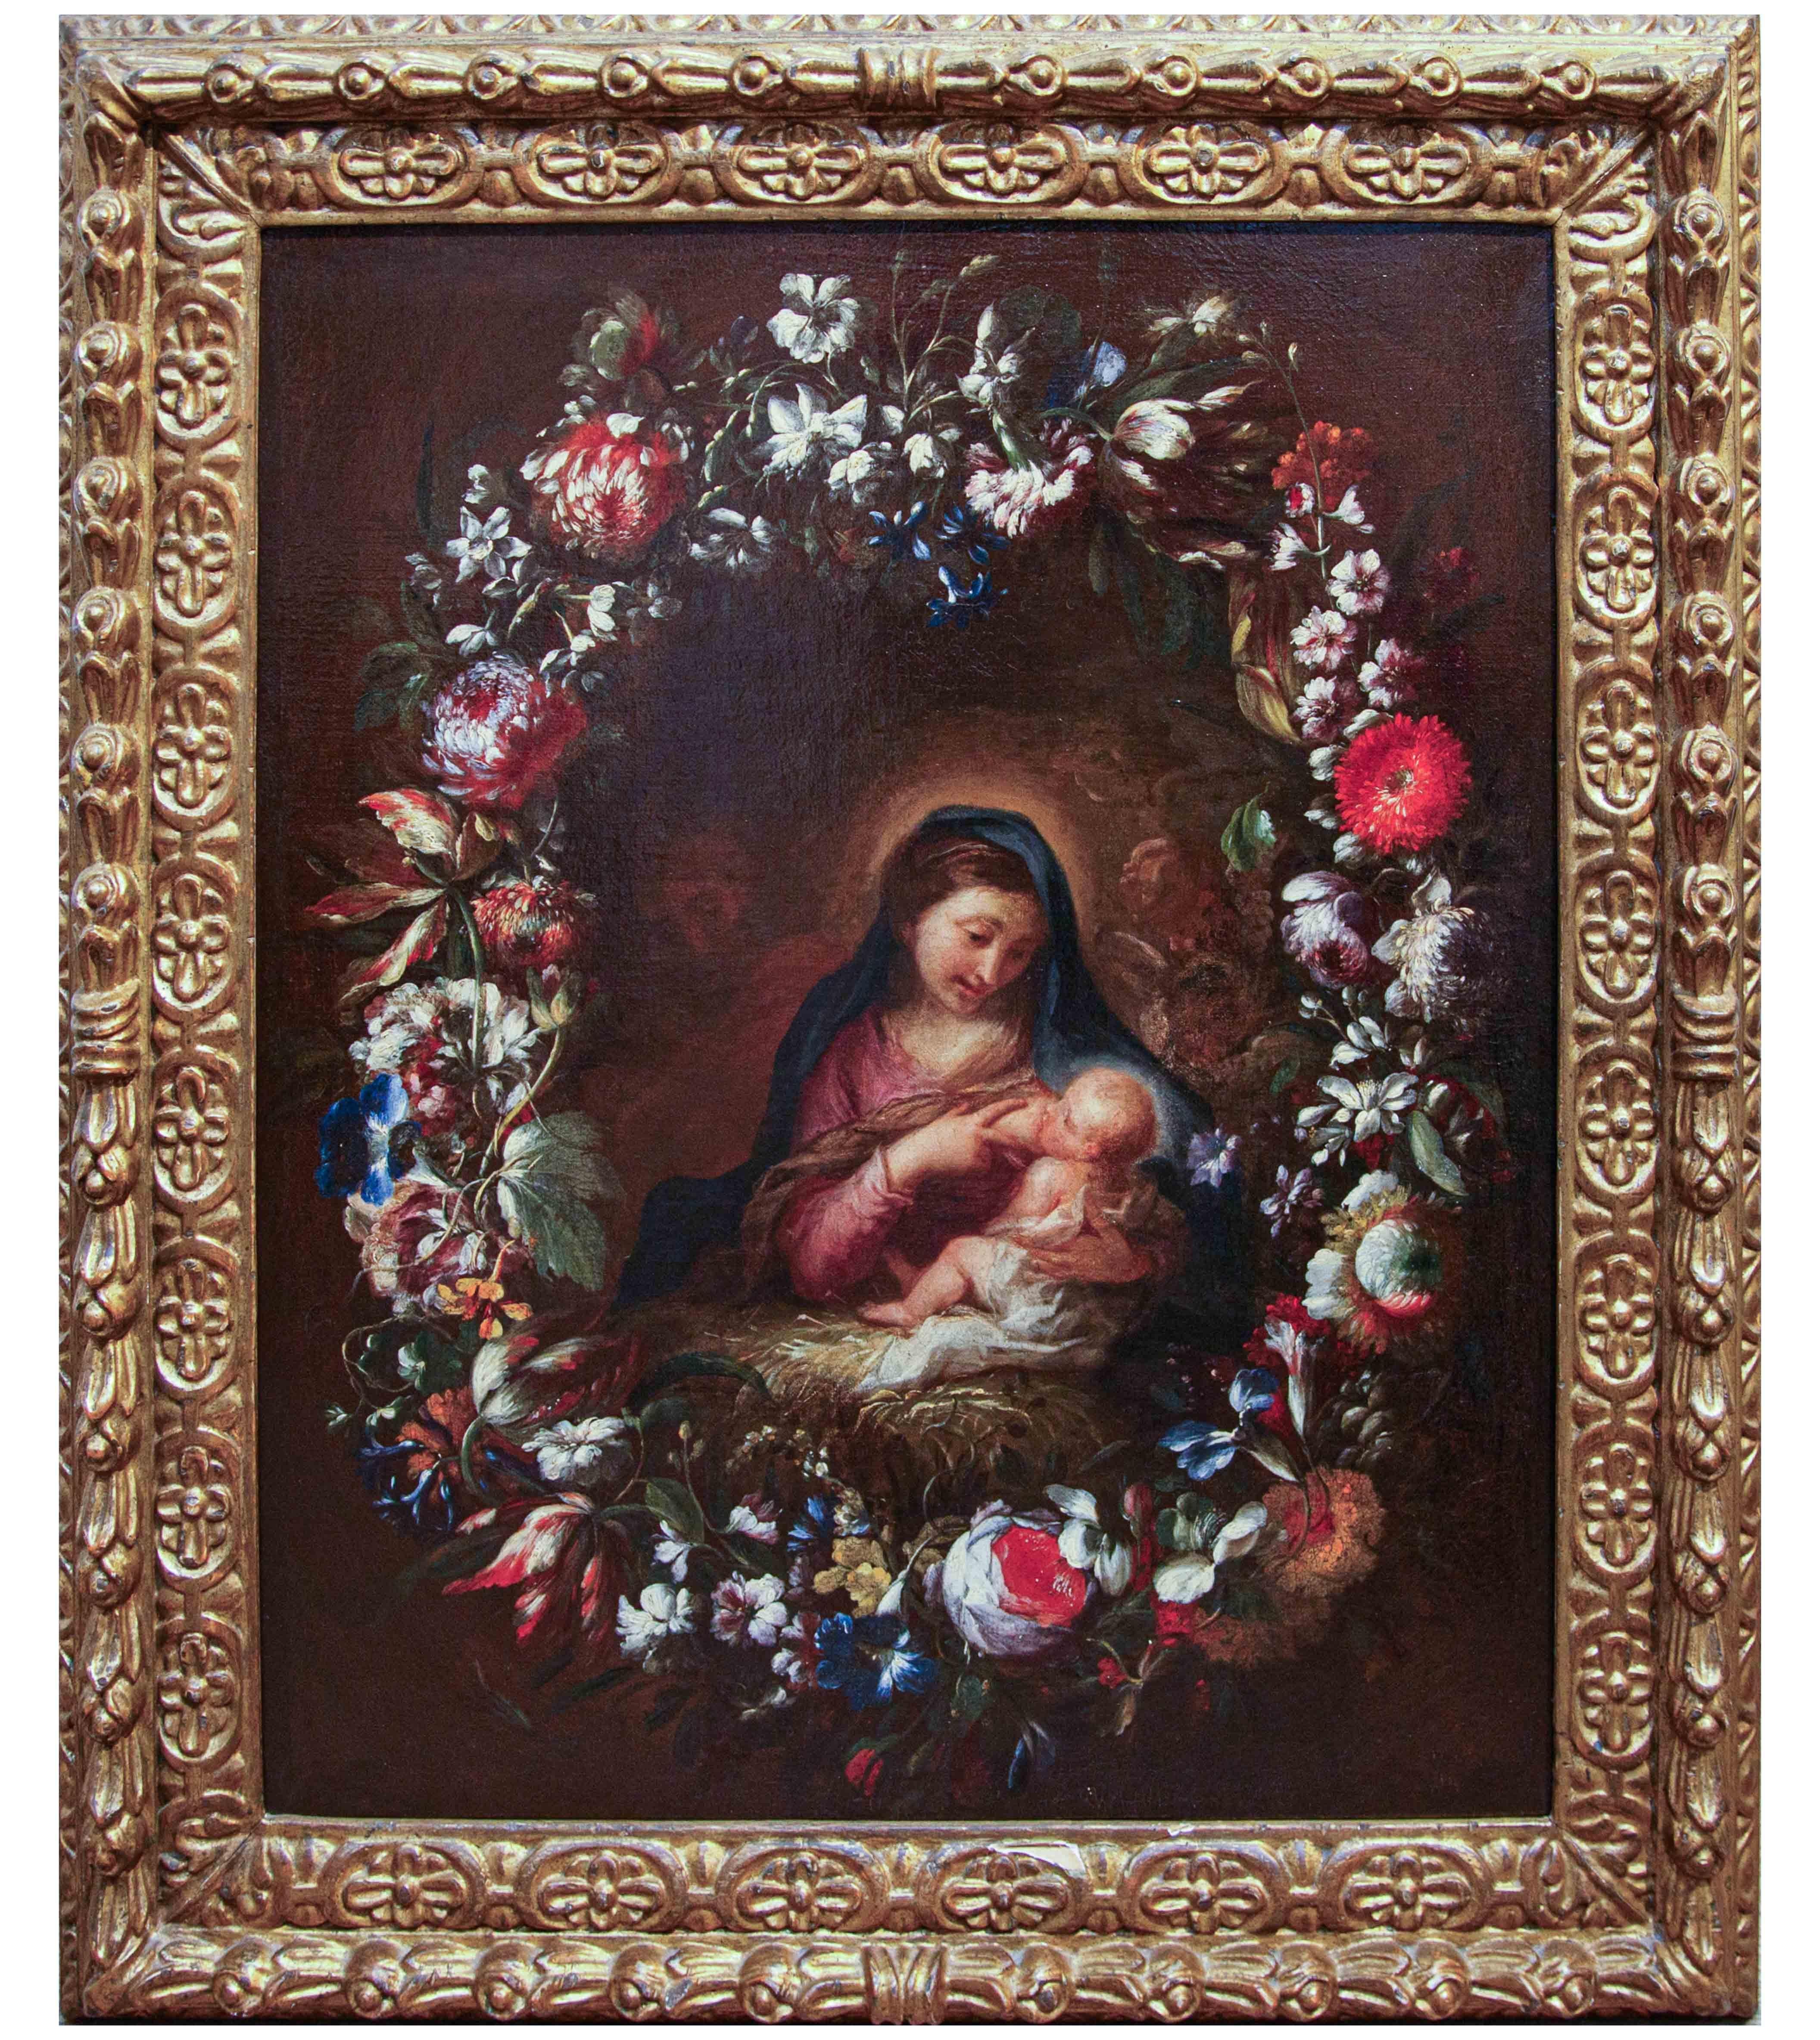 Andrea Belvedere's circle (Naples, 1646/52-1732), second half of the 17th century
Flower garland with Madonna nursing Child, St. Joseph and angels
Oil on canvas, 73 x 60 cm
Framed, 90 x 78 cm

With Jan Brueghel the Elder and Pieter Paul Rubens the